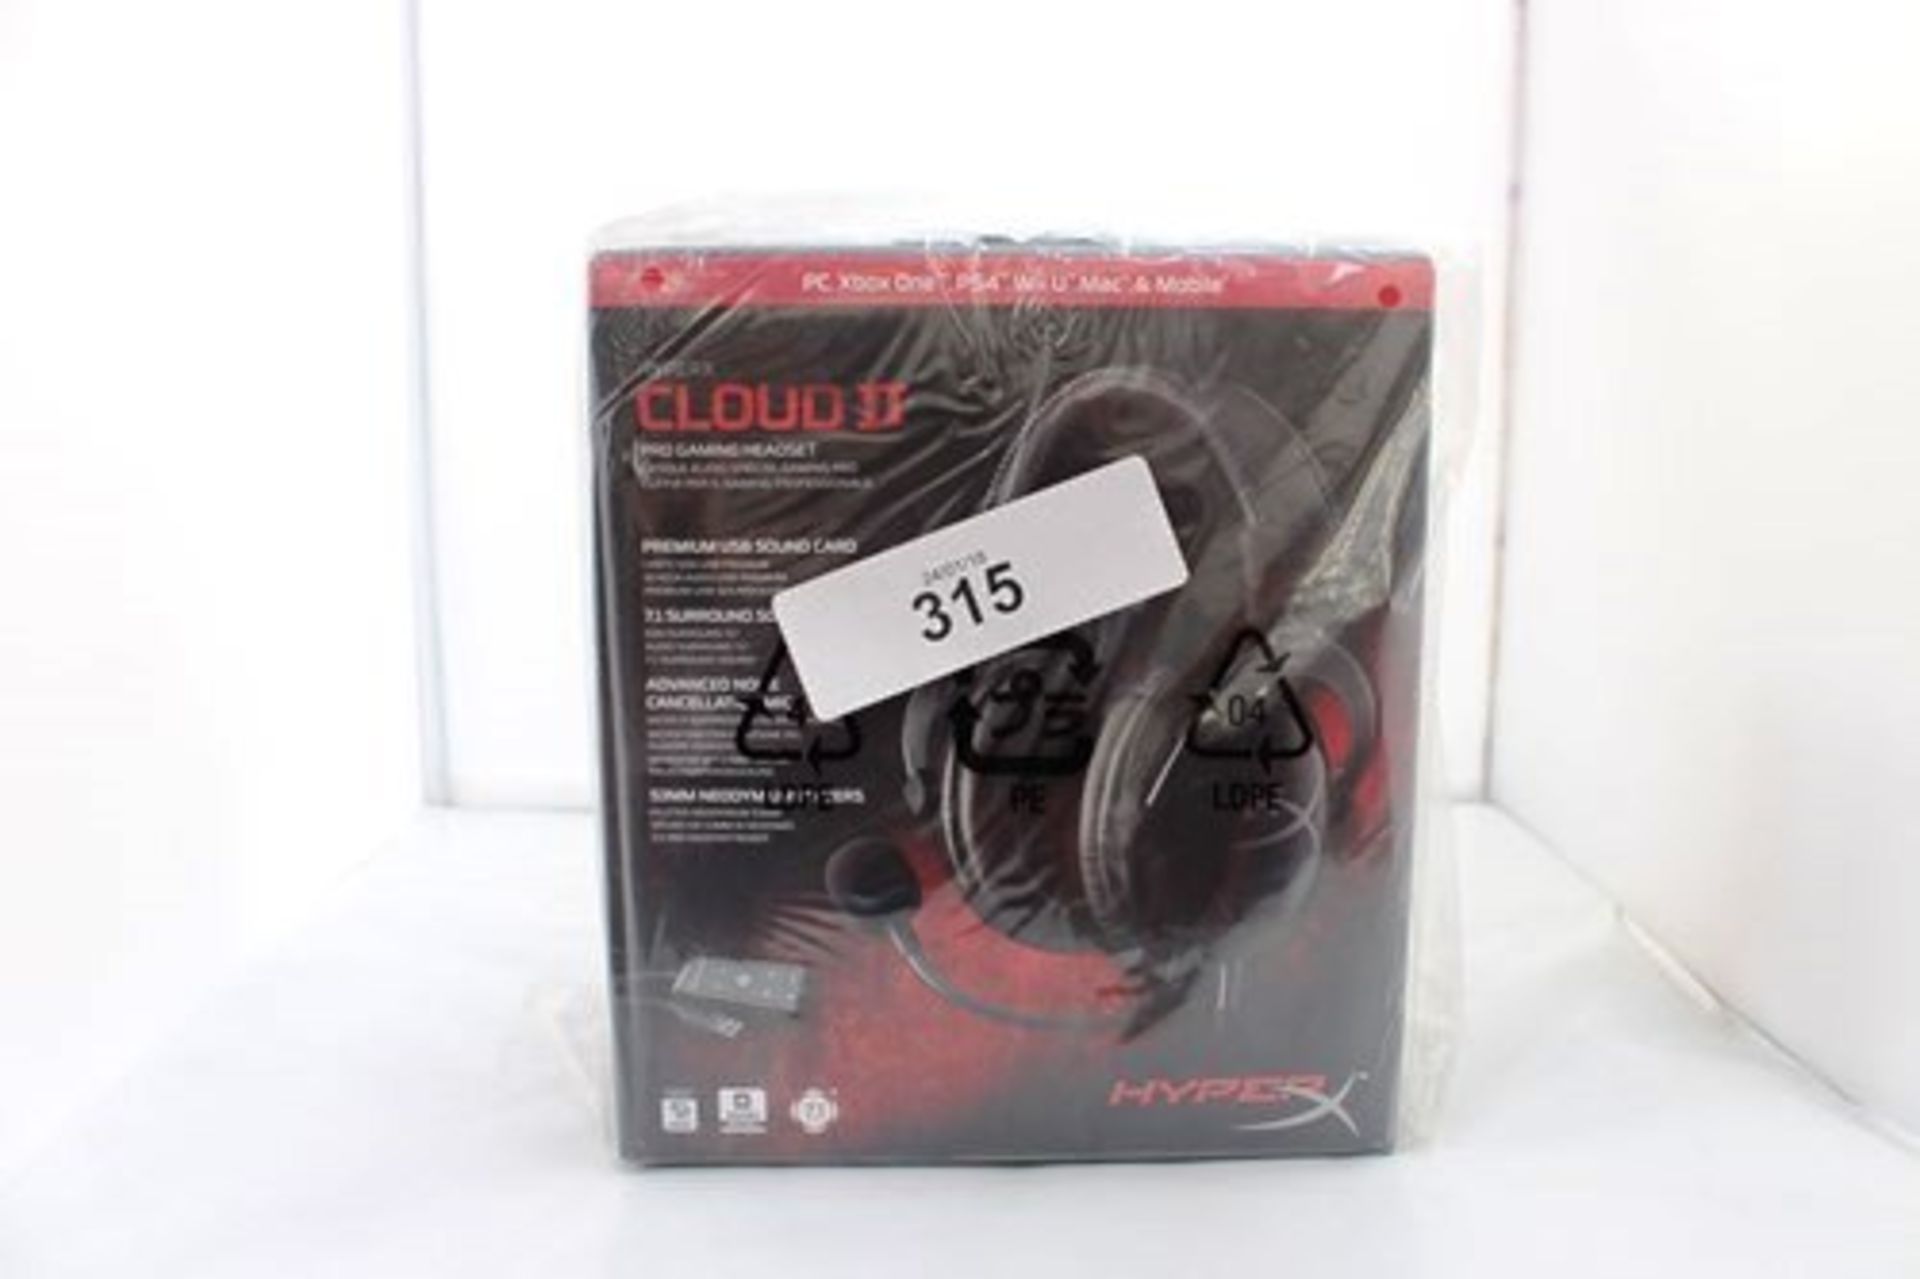 1 x Hyperx cloud 2 pro gaming headset, model number KHX-HSCP-GM - New in sealed box (C2)